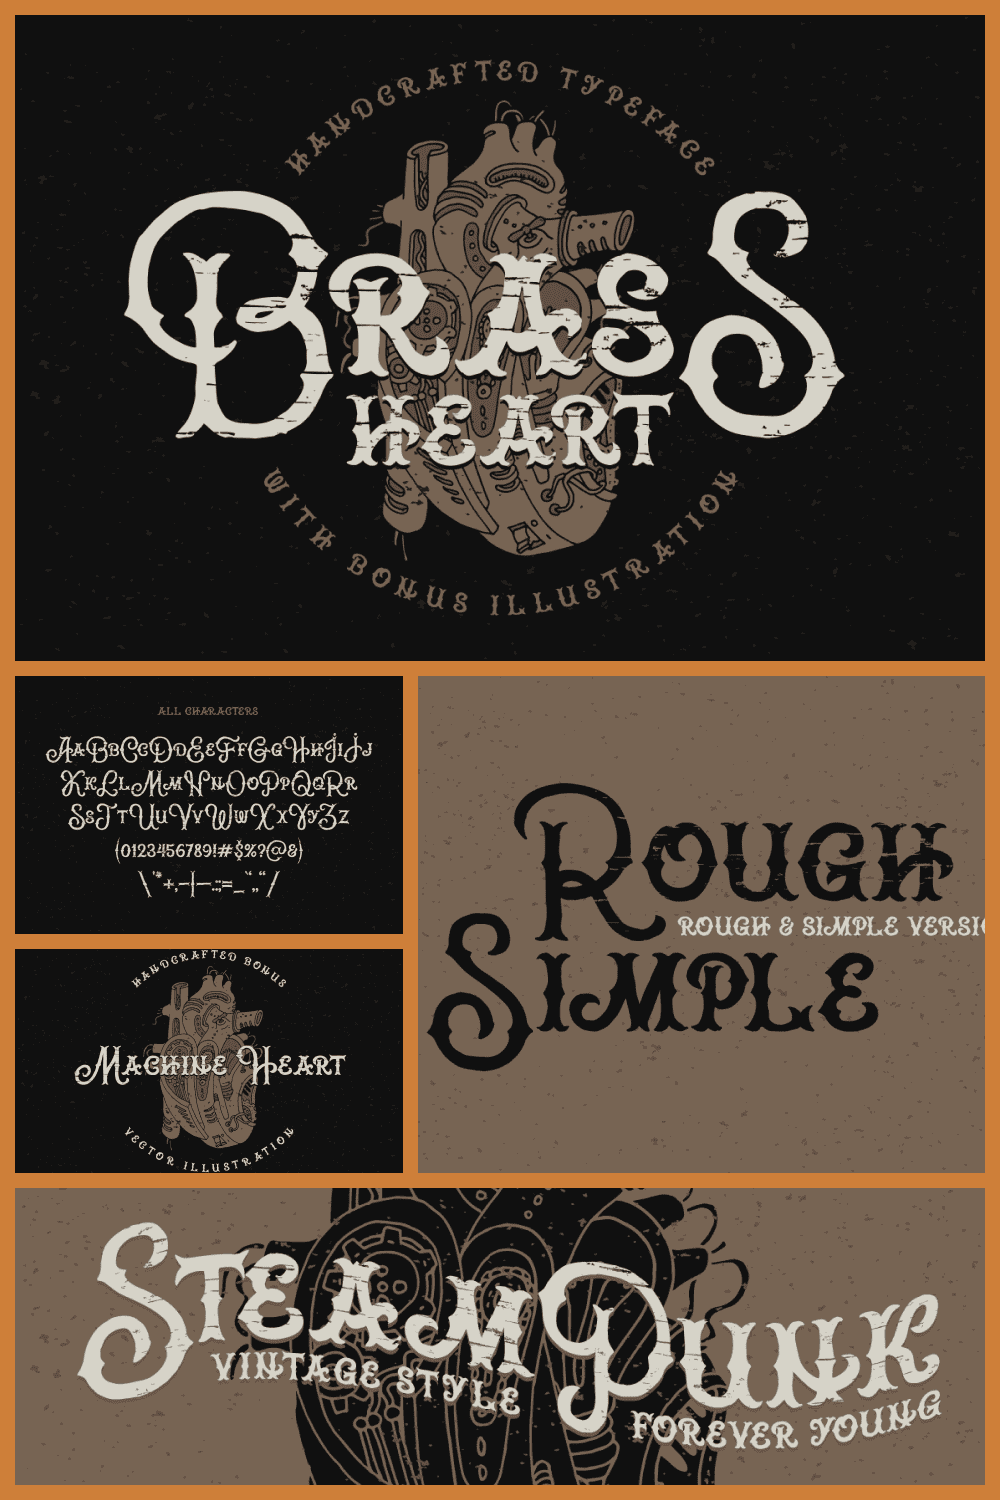 This font is the best decision for steampunk design.